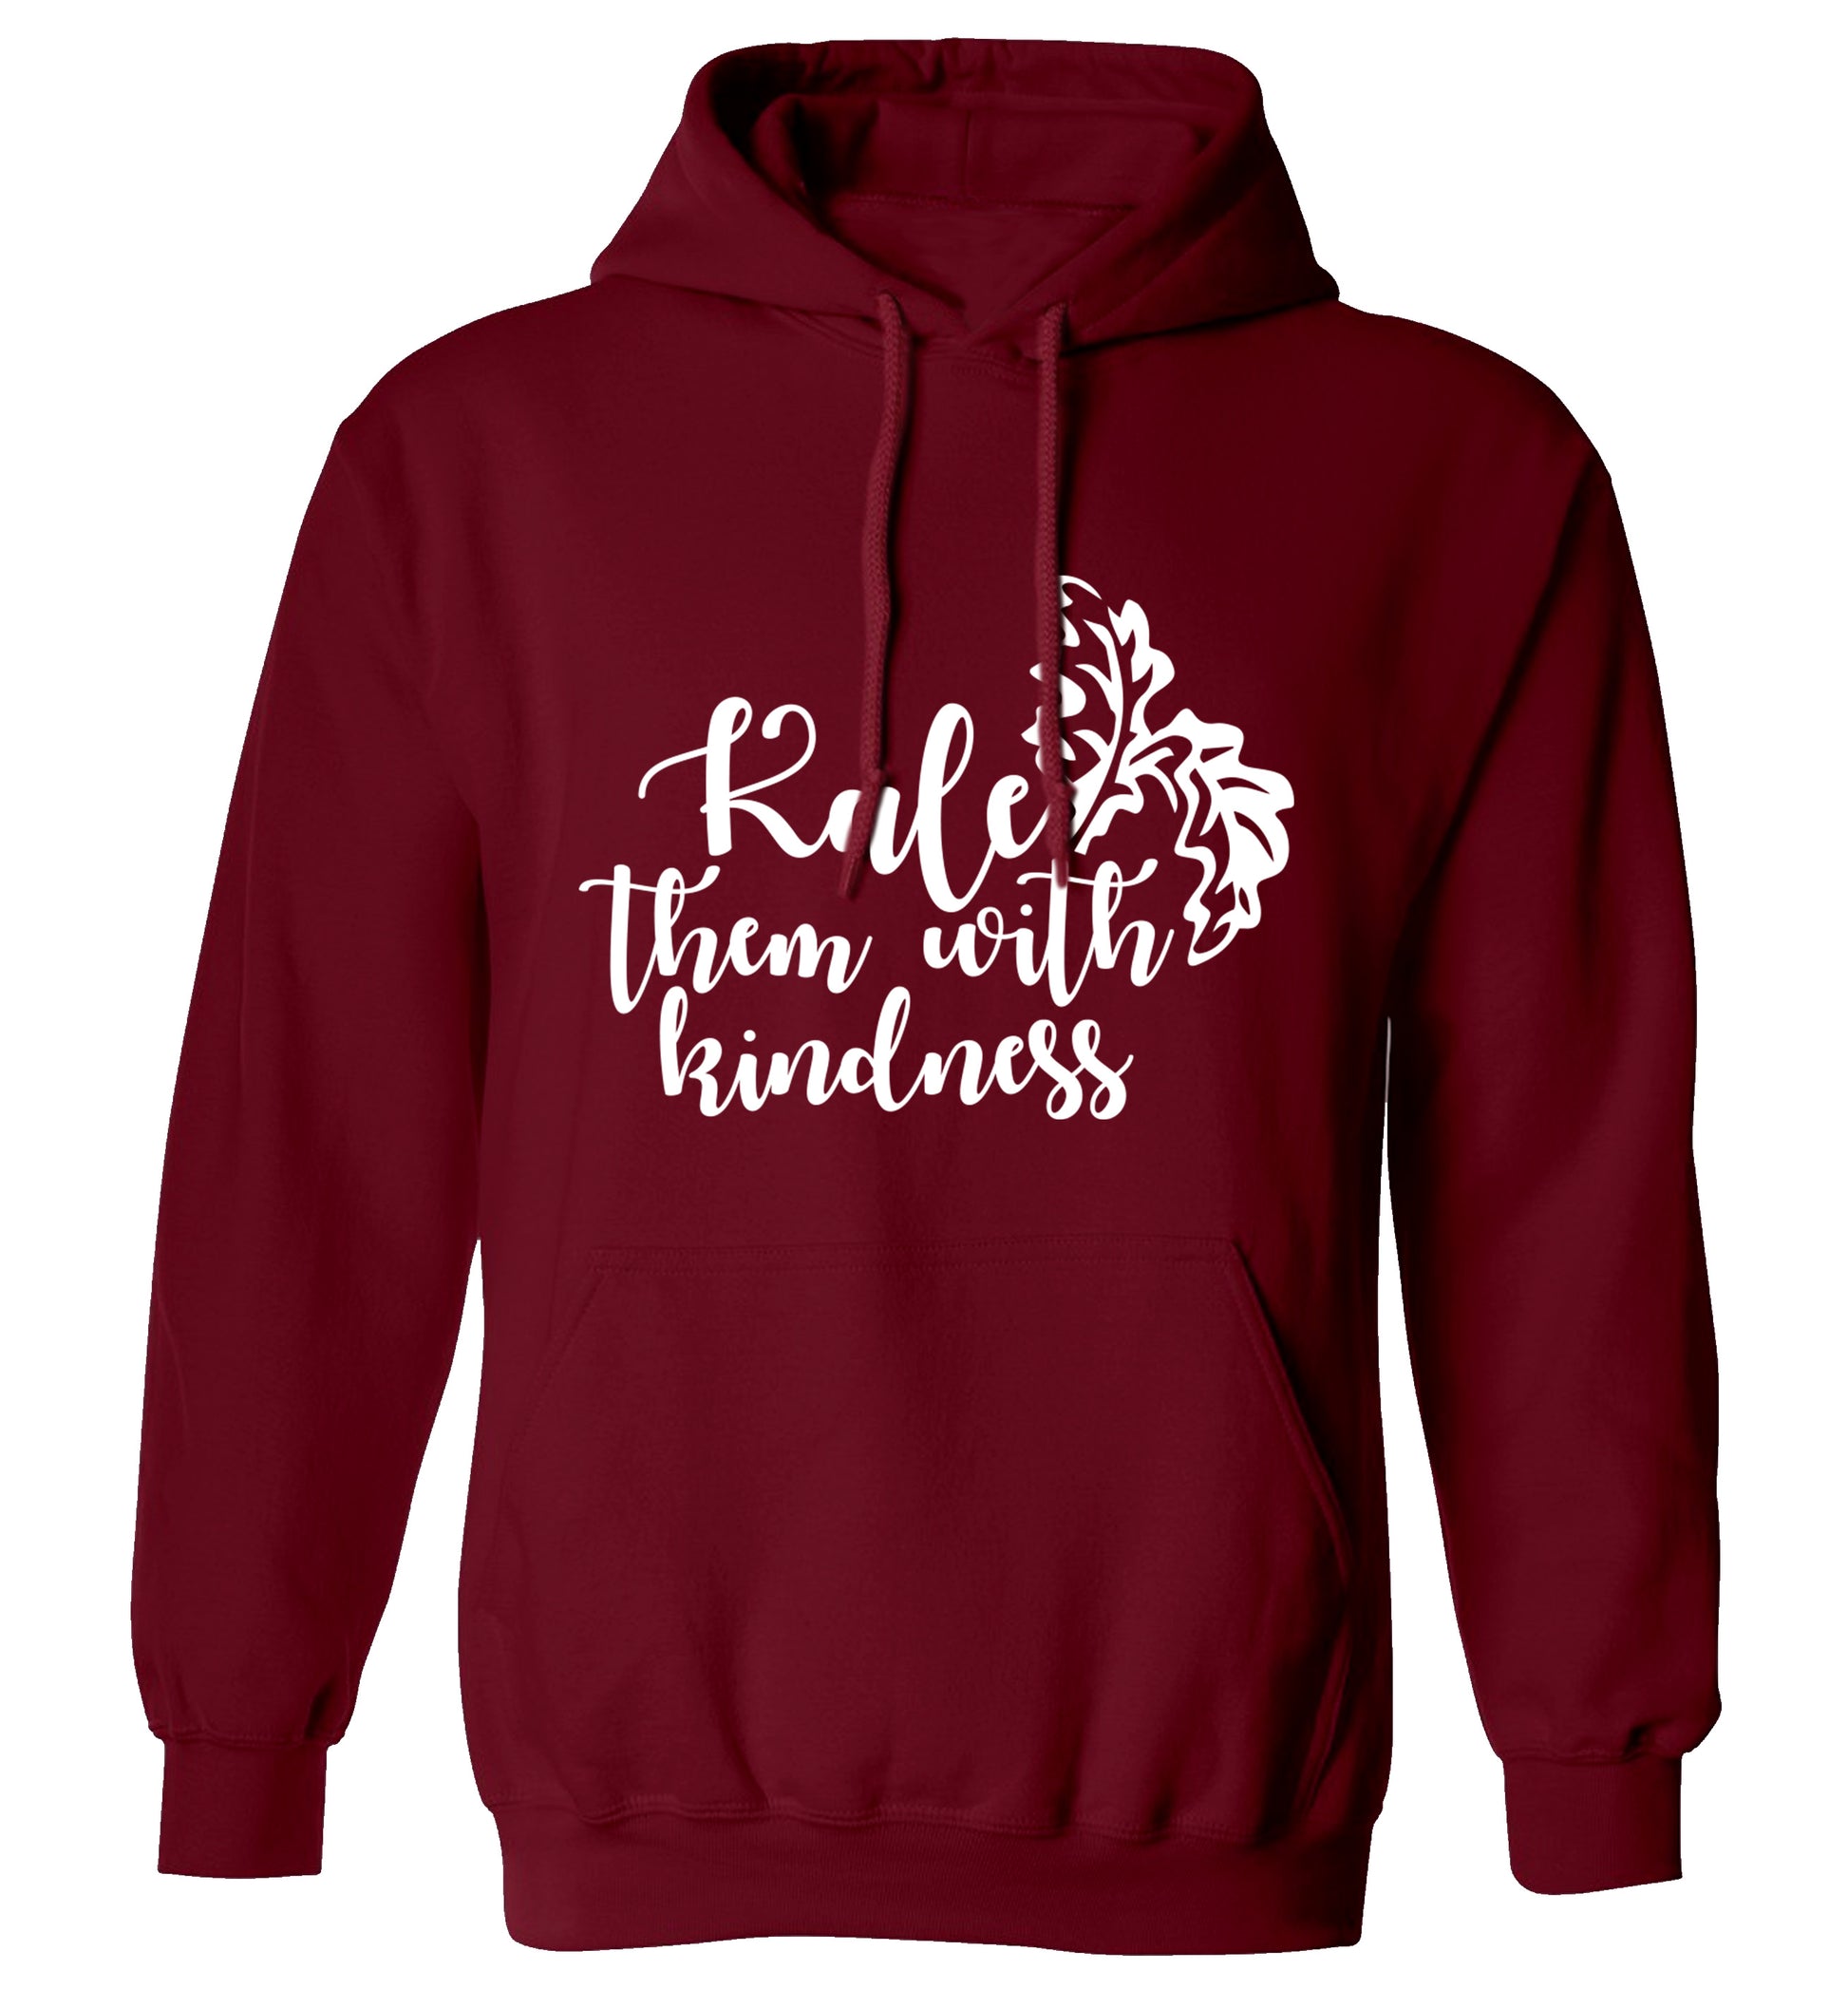 Kale them with kindness adults unisex maroon hoodie 2XL